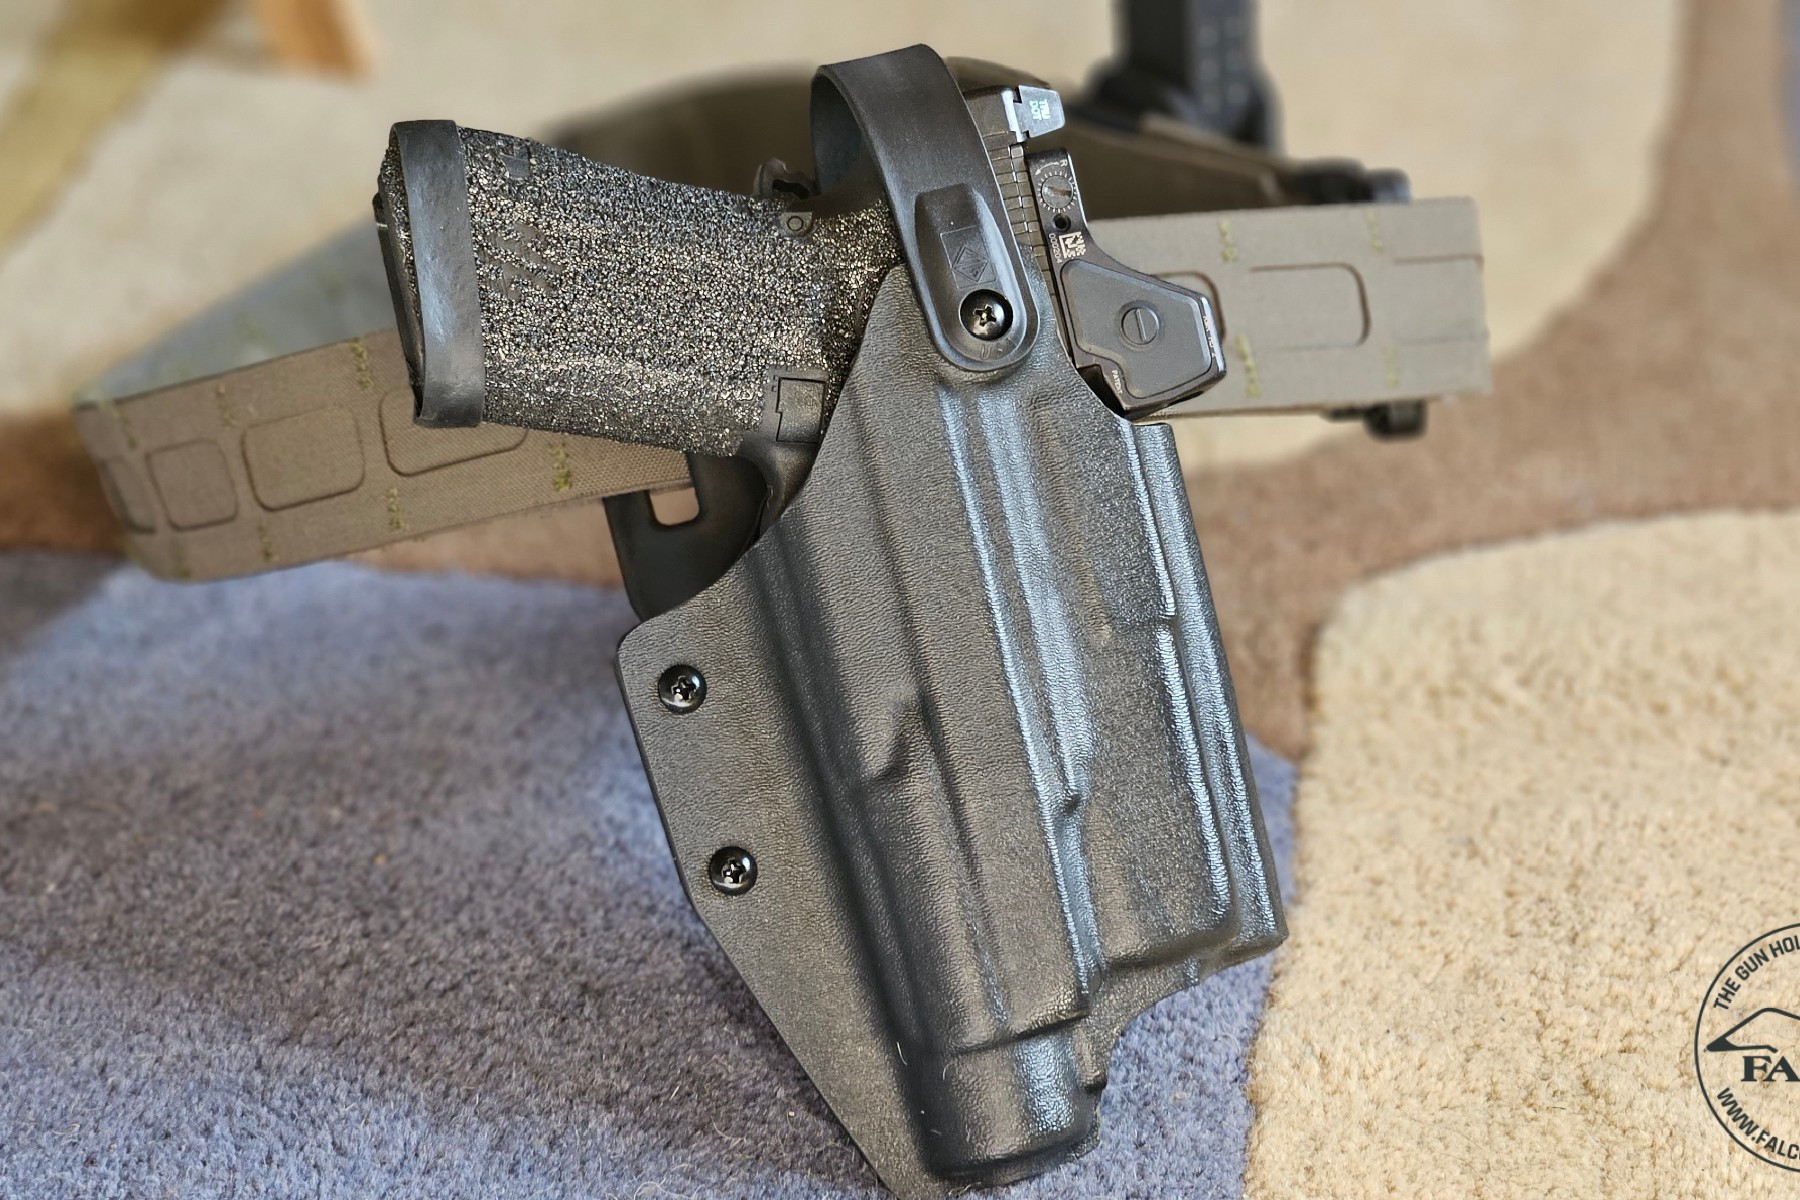 Taurus TH9 IWB Kydex Holster - Made in U.S.A. - Concealed Holsters